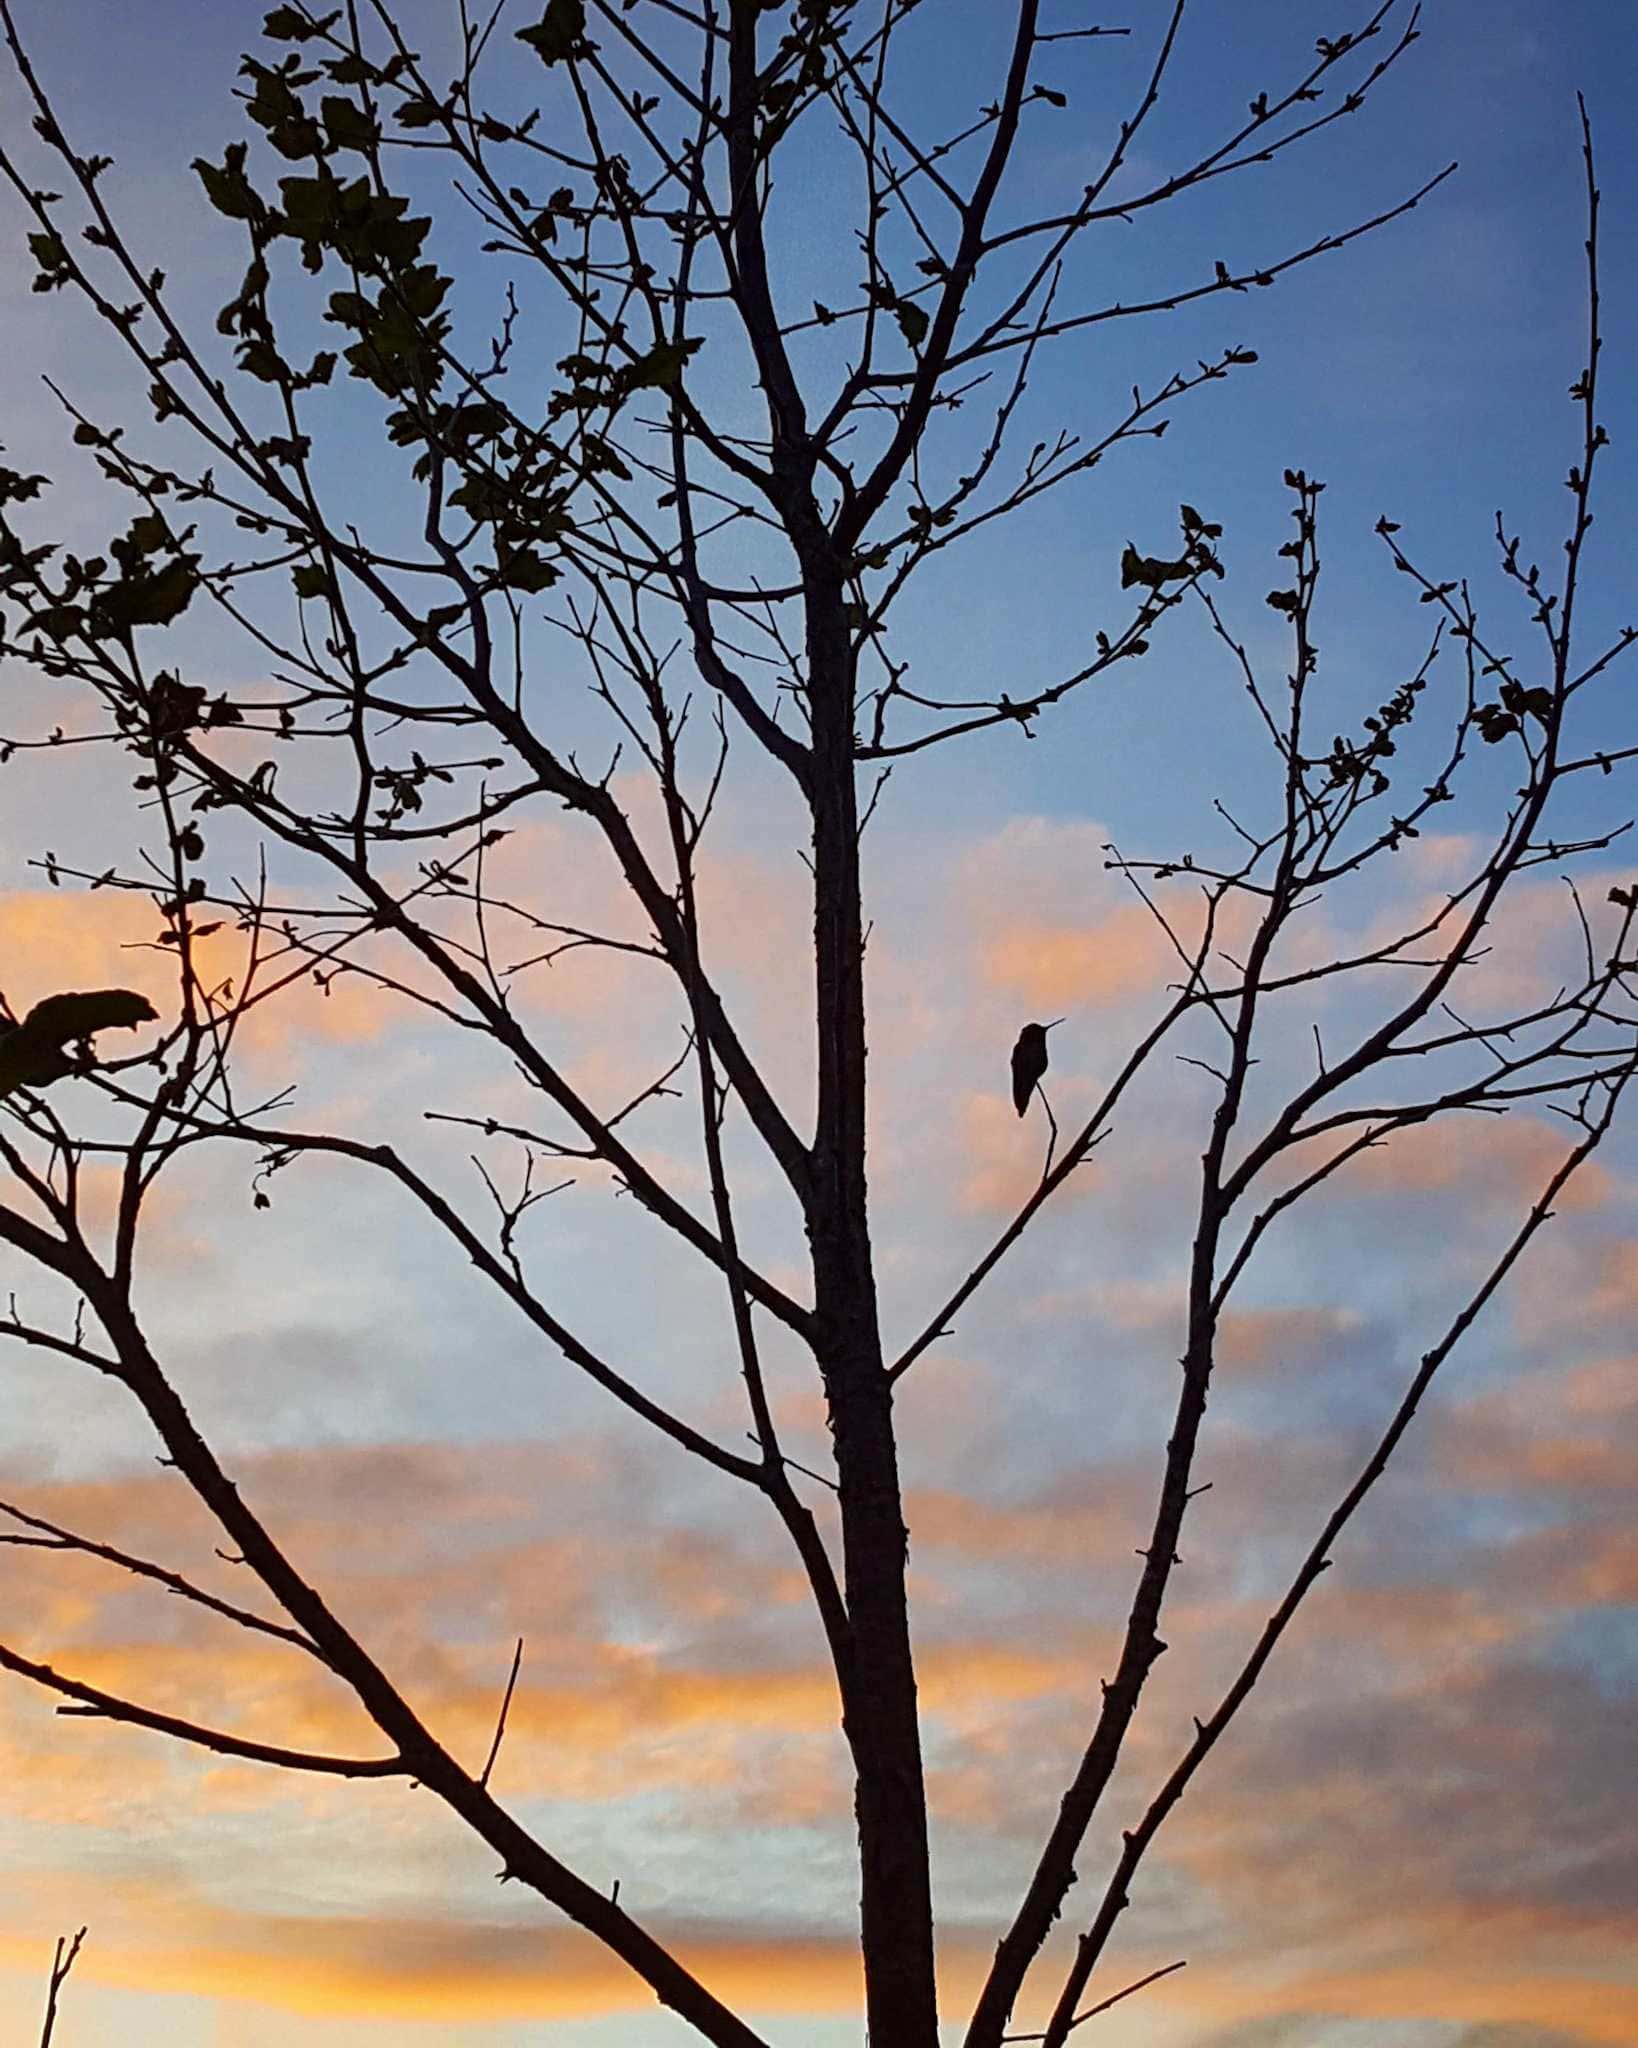 Part of the crown of a large California Sycamore is captured in the evening dusk. It is either the beginning of spring or winter by the lack of foliage and there is a hummingbird perched on a small branch of the tree. The sun is dipping below the horizon in the background so the tree and bird are dark and shaded compared to the sky which is blue with pink and orange clouds. 